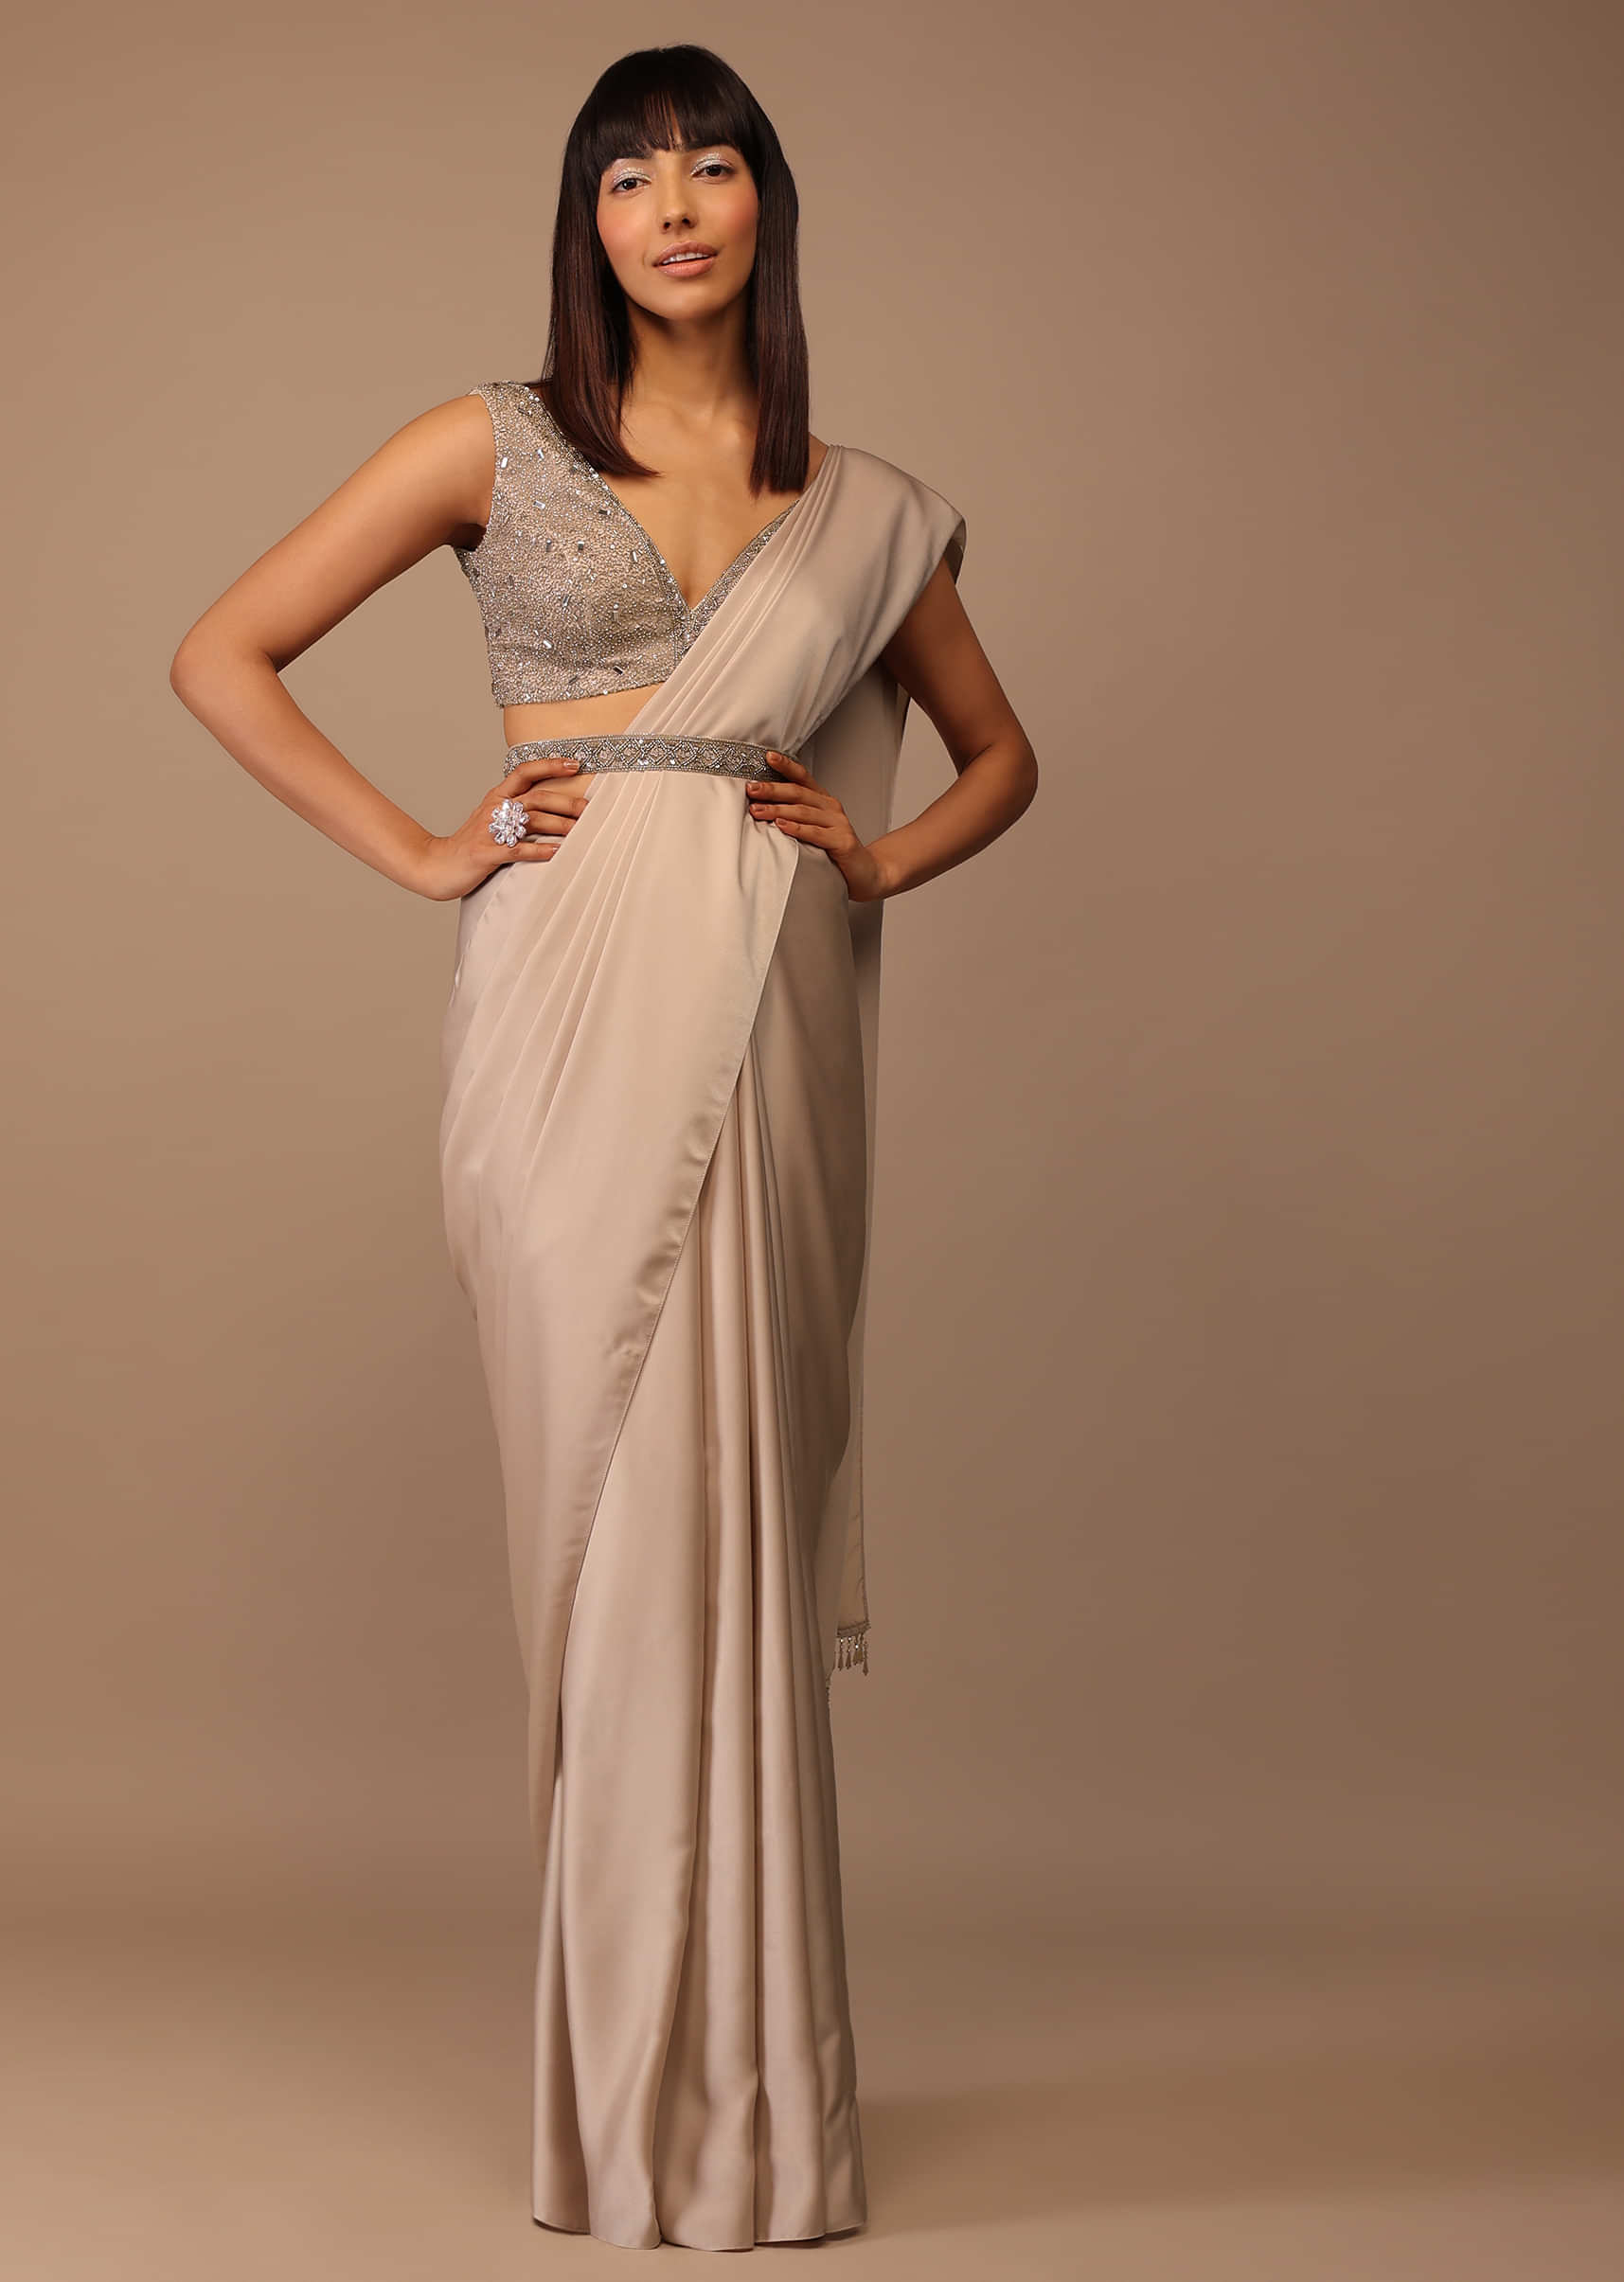 Champagne Satin Saree With Bead Fringes On Pallu Paired With Heavily Embellished  Crop Top